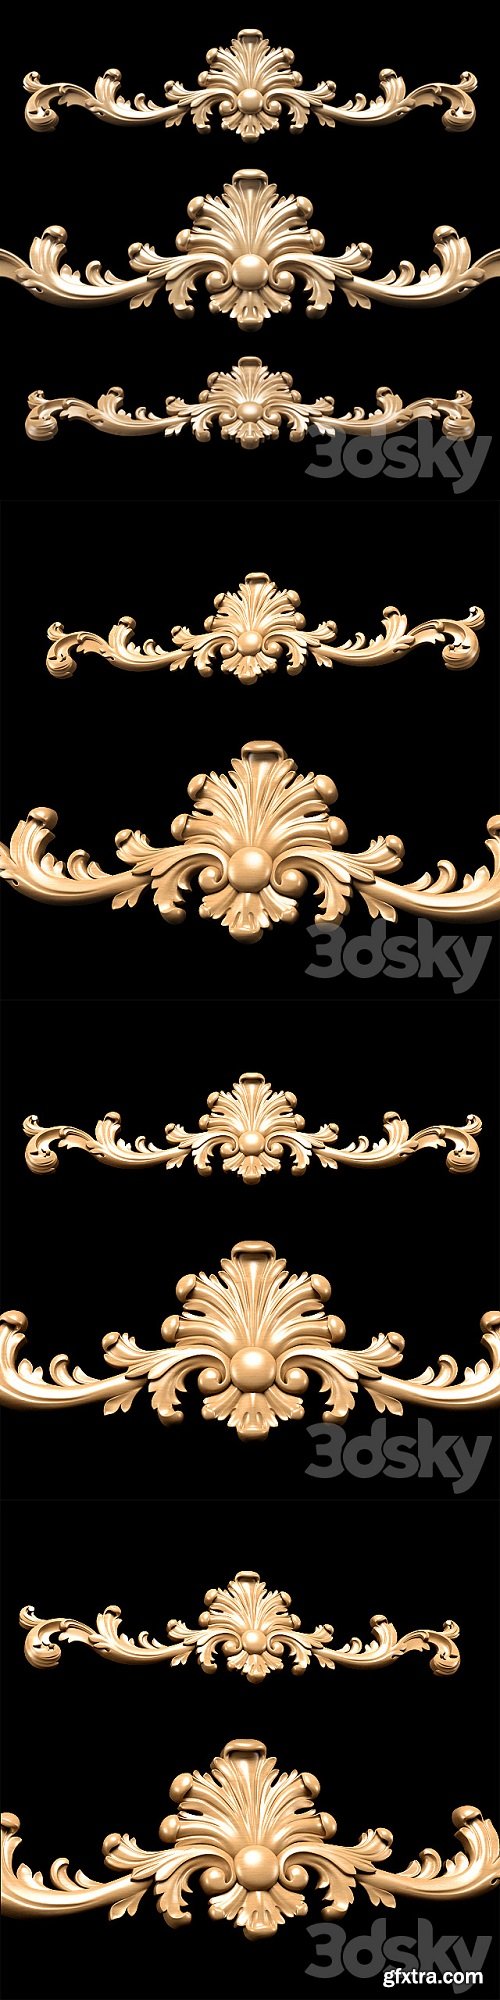 Baroque carving